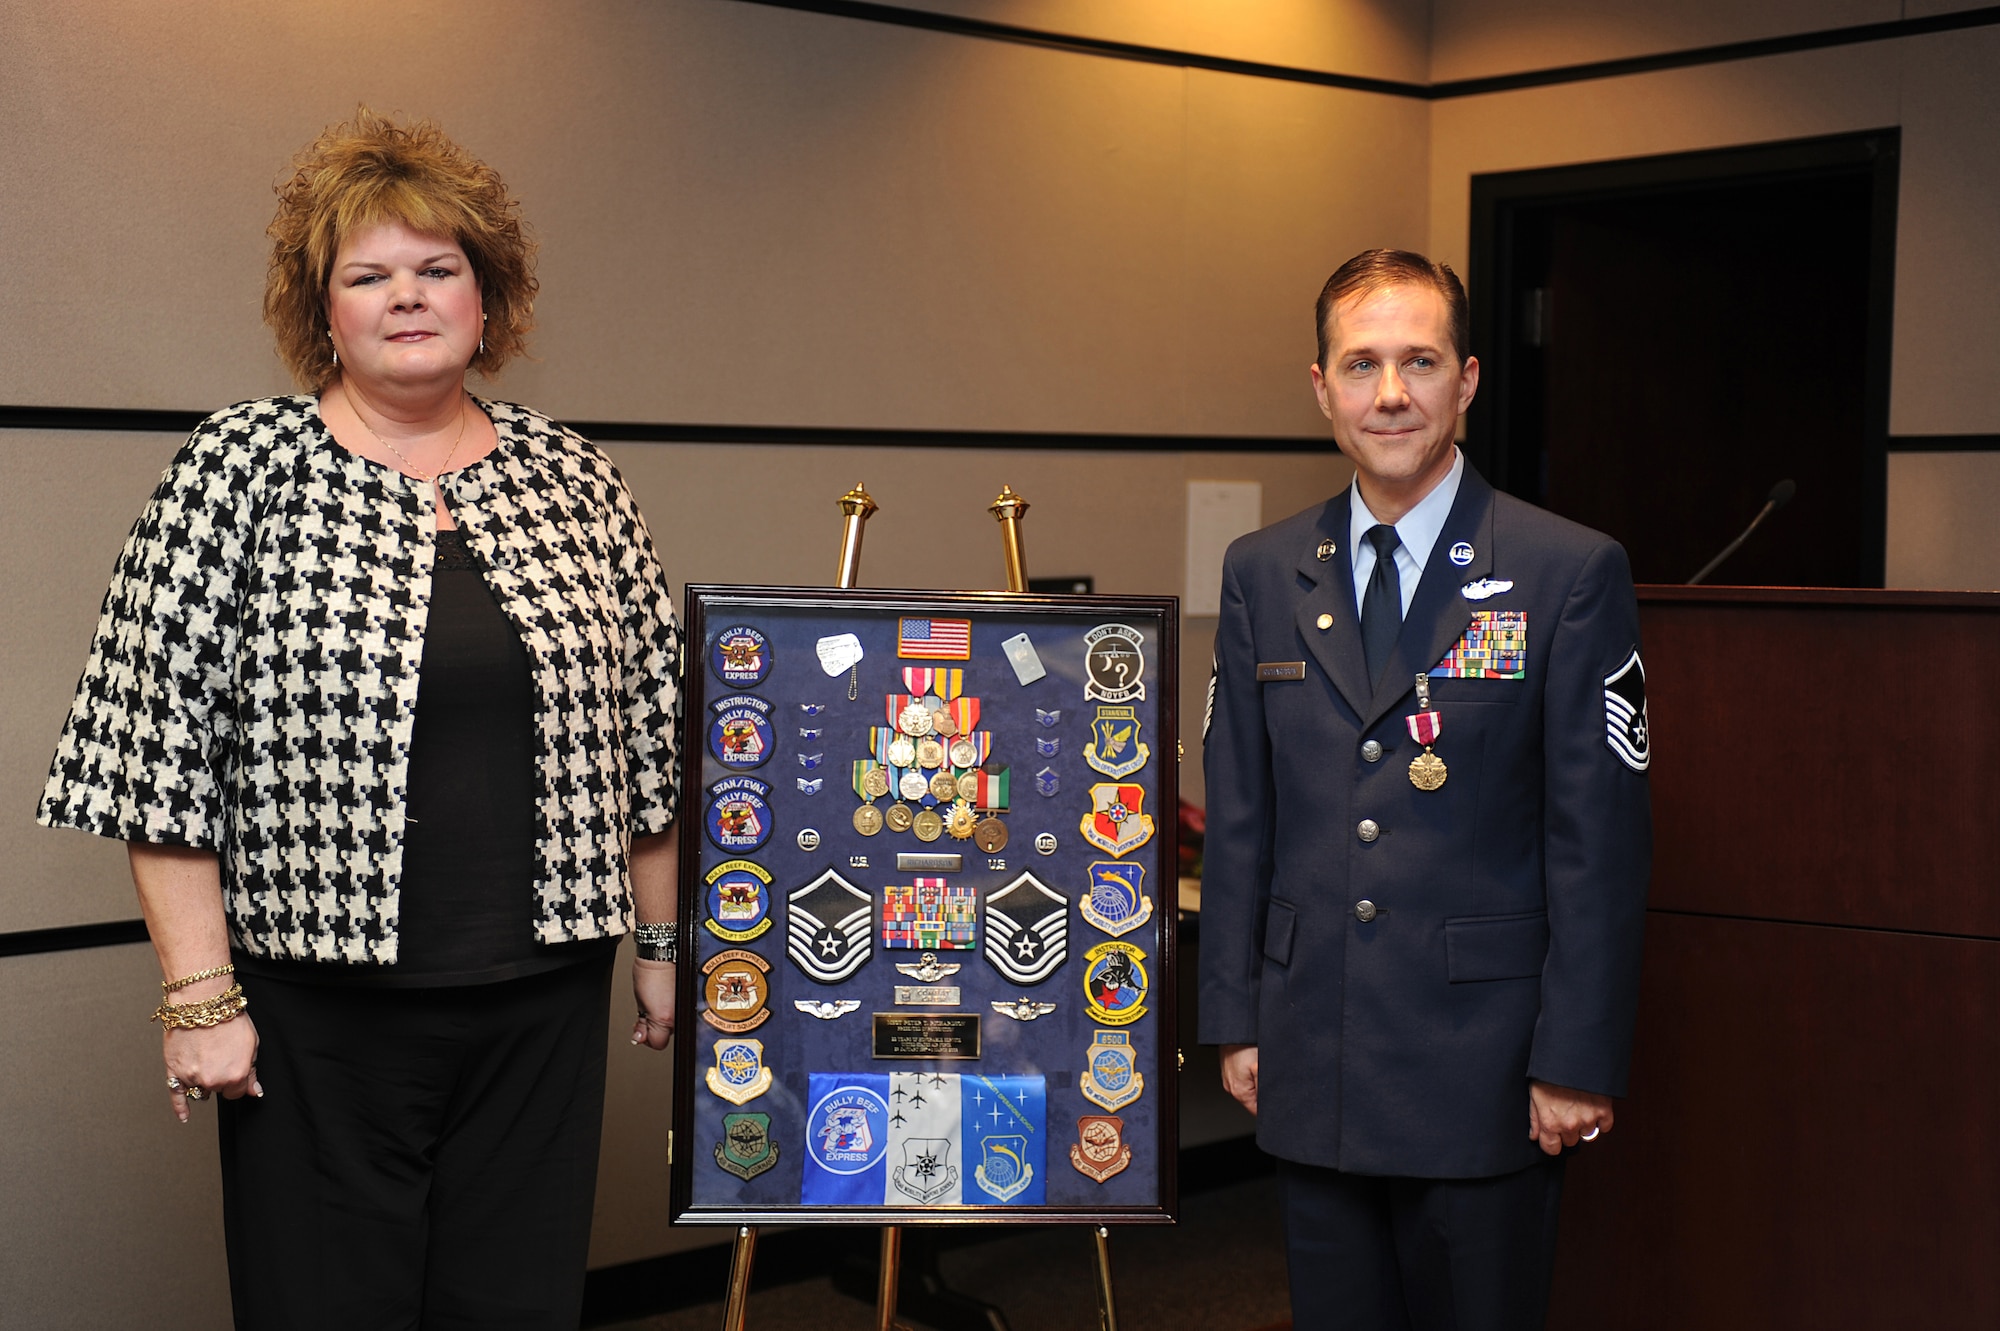 Master Sgt. Peter Richardson and his wife, Dorothy, pose for a picture next to his shadow box during his retirement ceremony in the U.S. Air Force Expeditionary Center on Fort Dix, N.J., Jan. 9, 2009.  Sergeant Richardson was a command tactician for the Combat Aircrew Tactics Studies Course.  He was then selected to fulfill the position of course director for the CATS course in his last years at the Expeditionary Center. (U.S. Air Force Photo/Staff Sgt. Nathan Bevier)